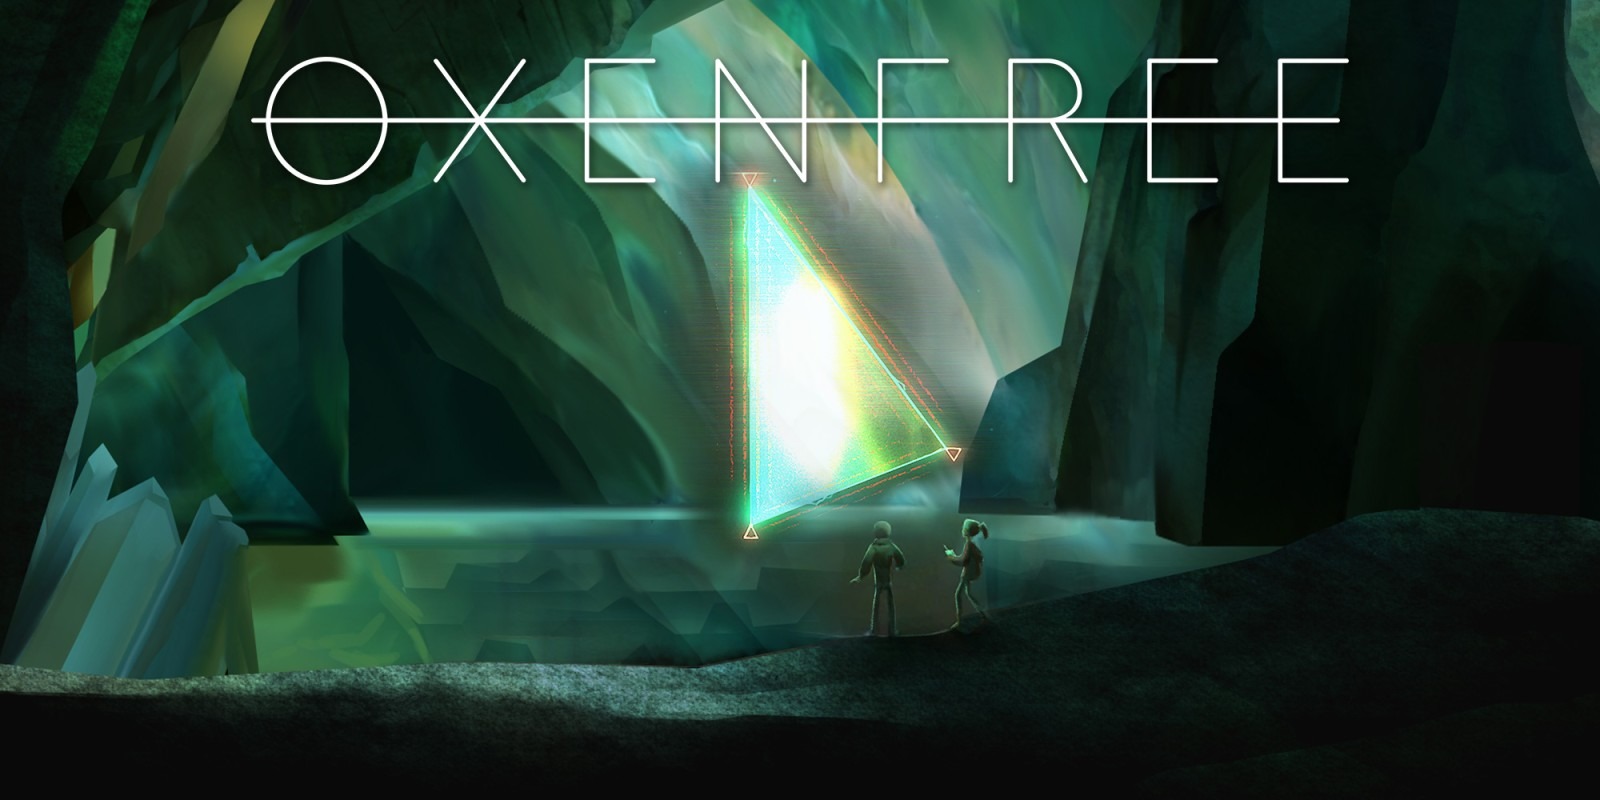 H2x1_NSwitchDS_Oxenfree_image160